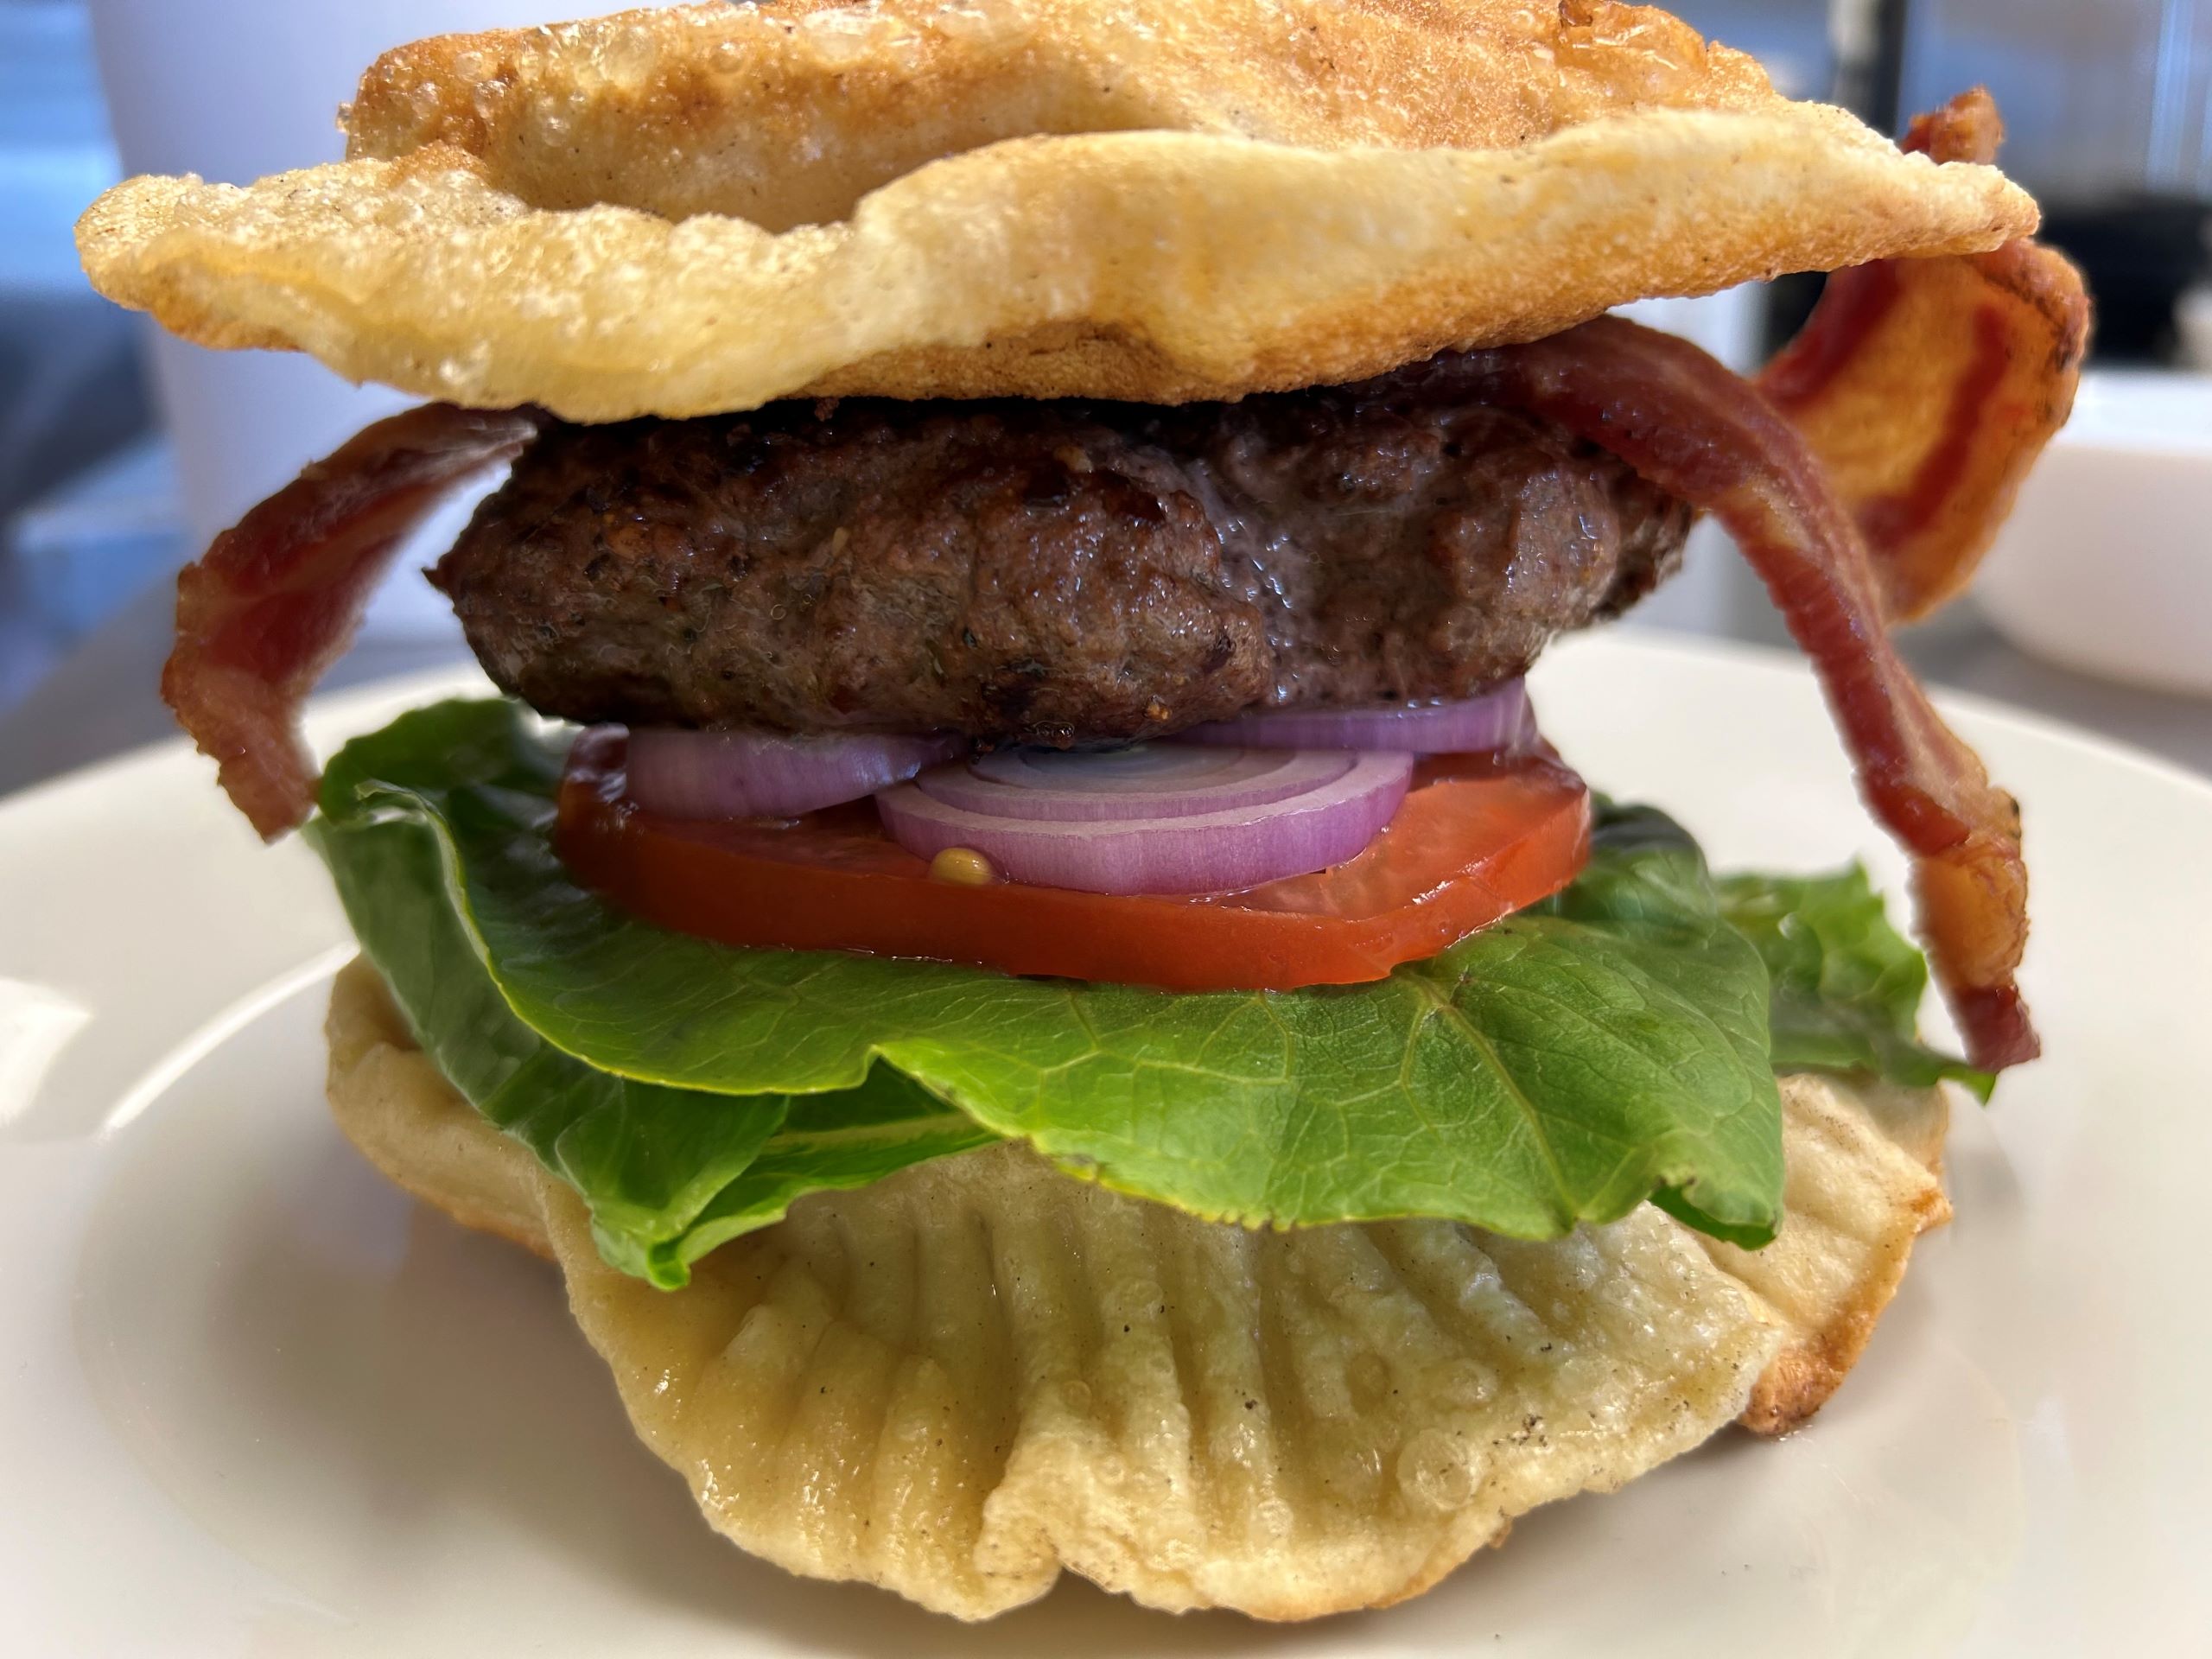 Kat's Pierogi Smash Burger is 2 XL hand-made crispy potato-cheese pierogies sandwiching a smash patty burger made from scratch with strips of bacon, sliced onions, sliced tomatoes, and lettuce, served on a white plate.